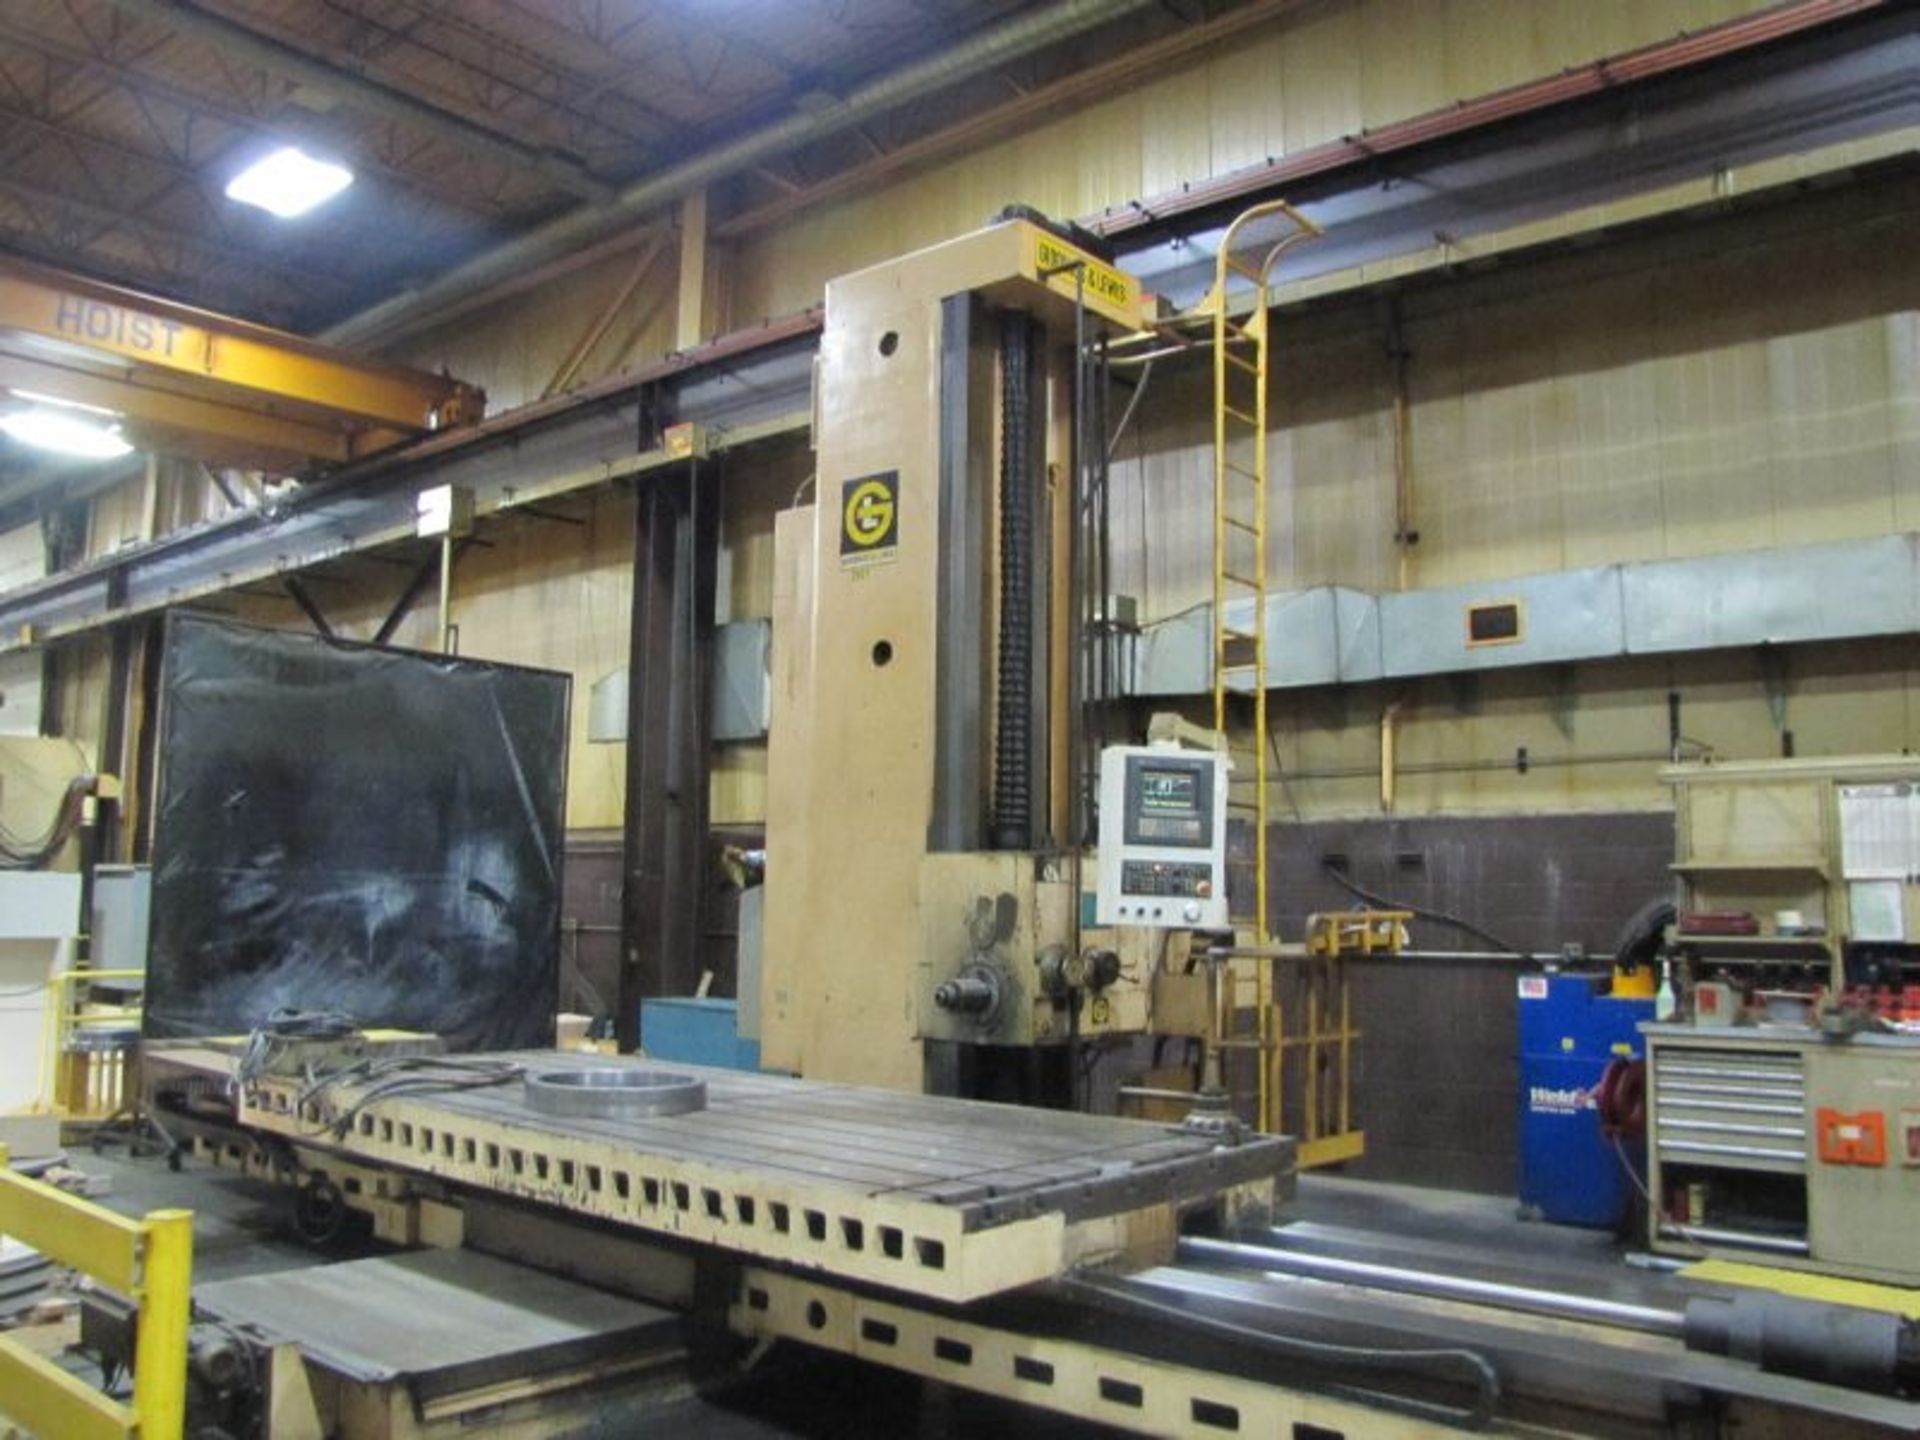 Giddings & Lewis Model H6T CNC 6” HBM, MFG.1974, Updated in 2014 with Allen Bradley 9 Series CNC Con